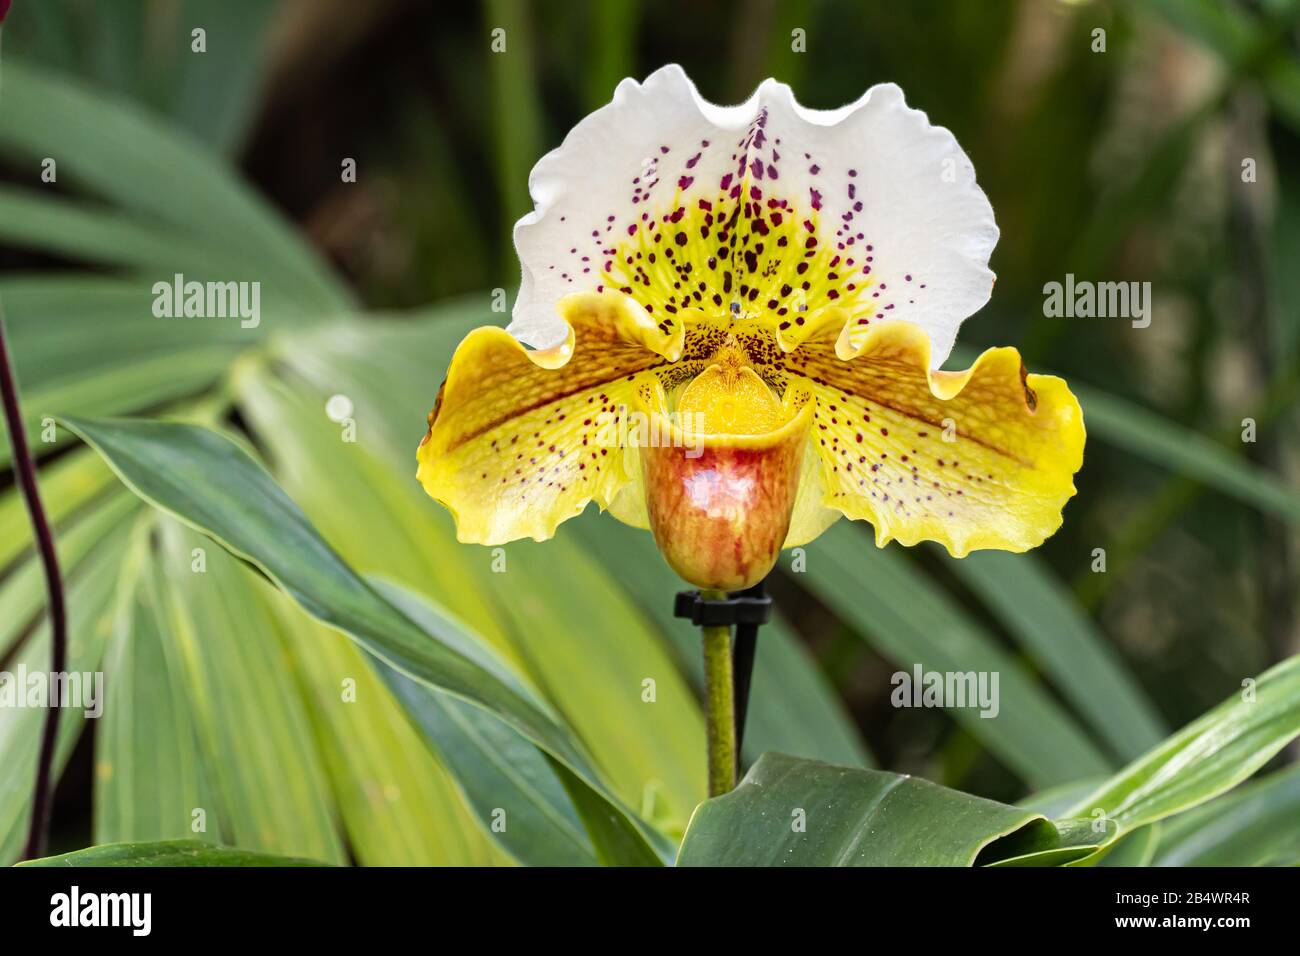 Beautiful Orchid Paphiopedilum flowers bloom in spring adorn the beauty of nature close up Stock Photo